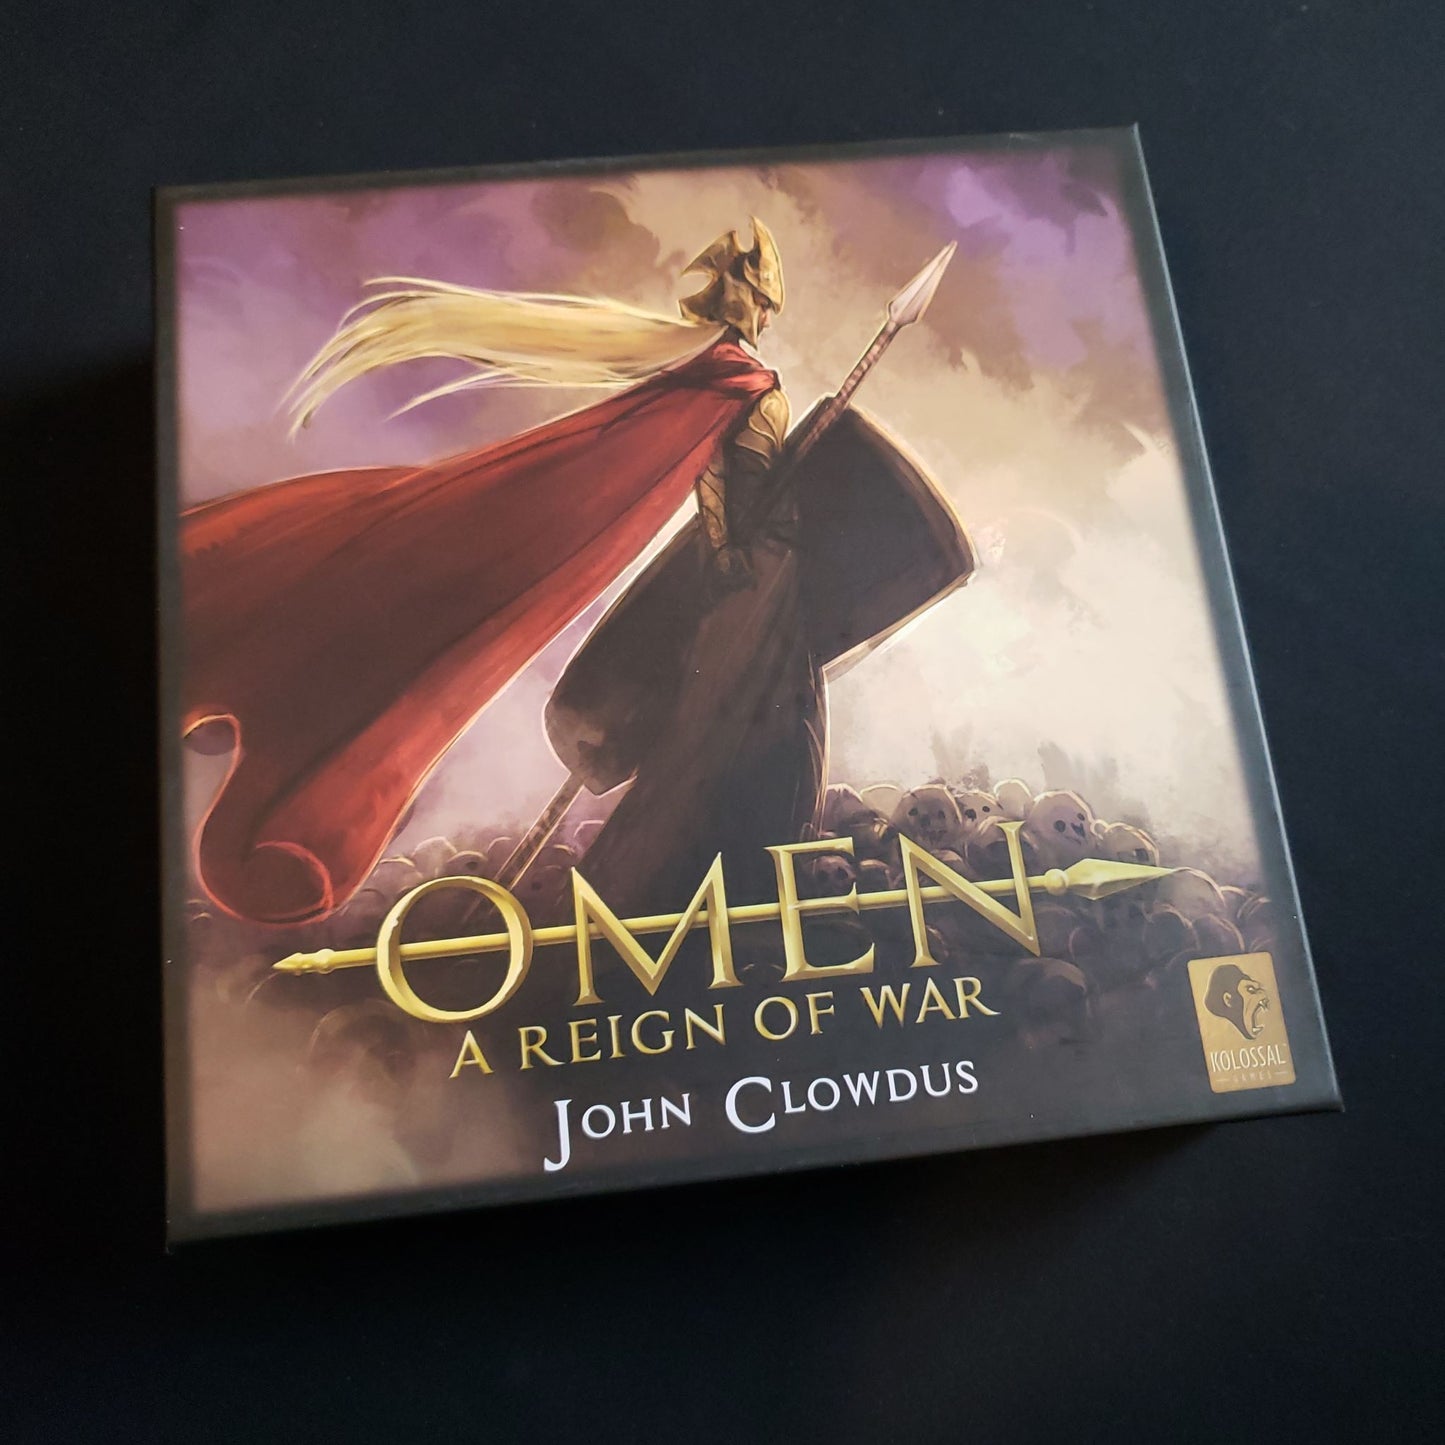 Image shows the front cover of the box of the Omen: A Reign of War card game